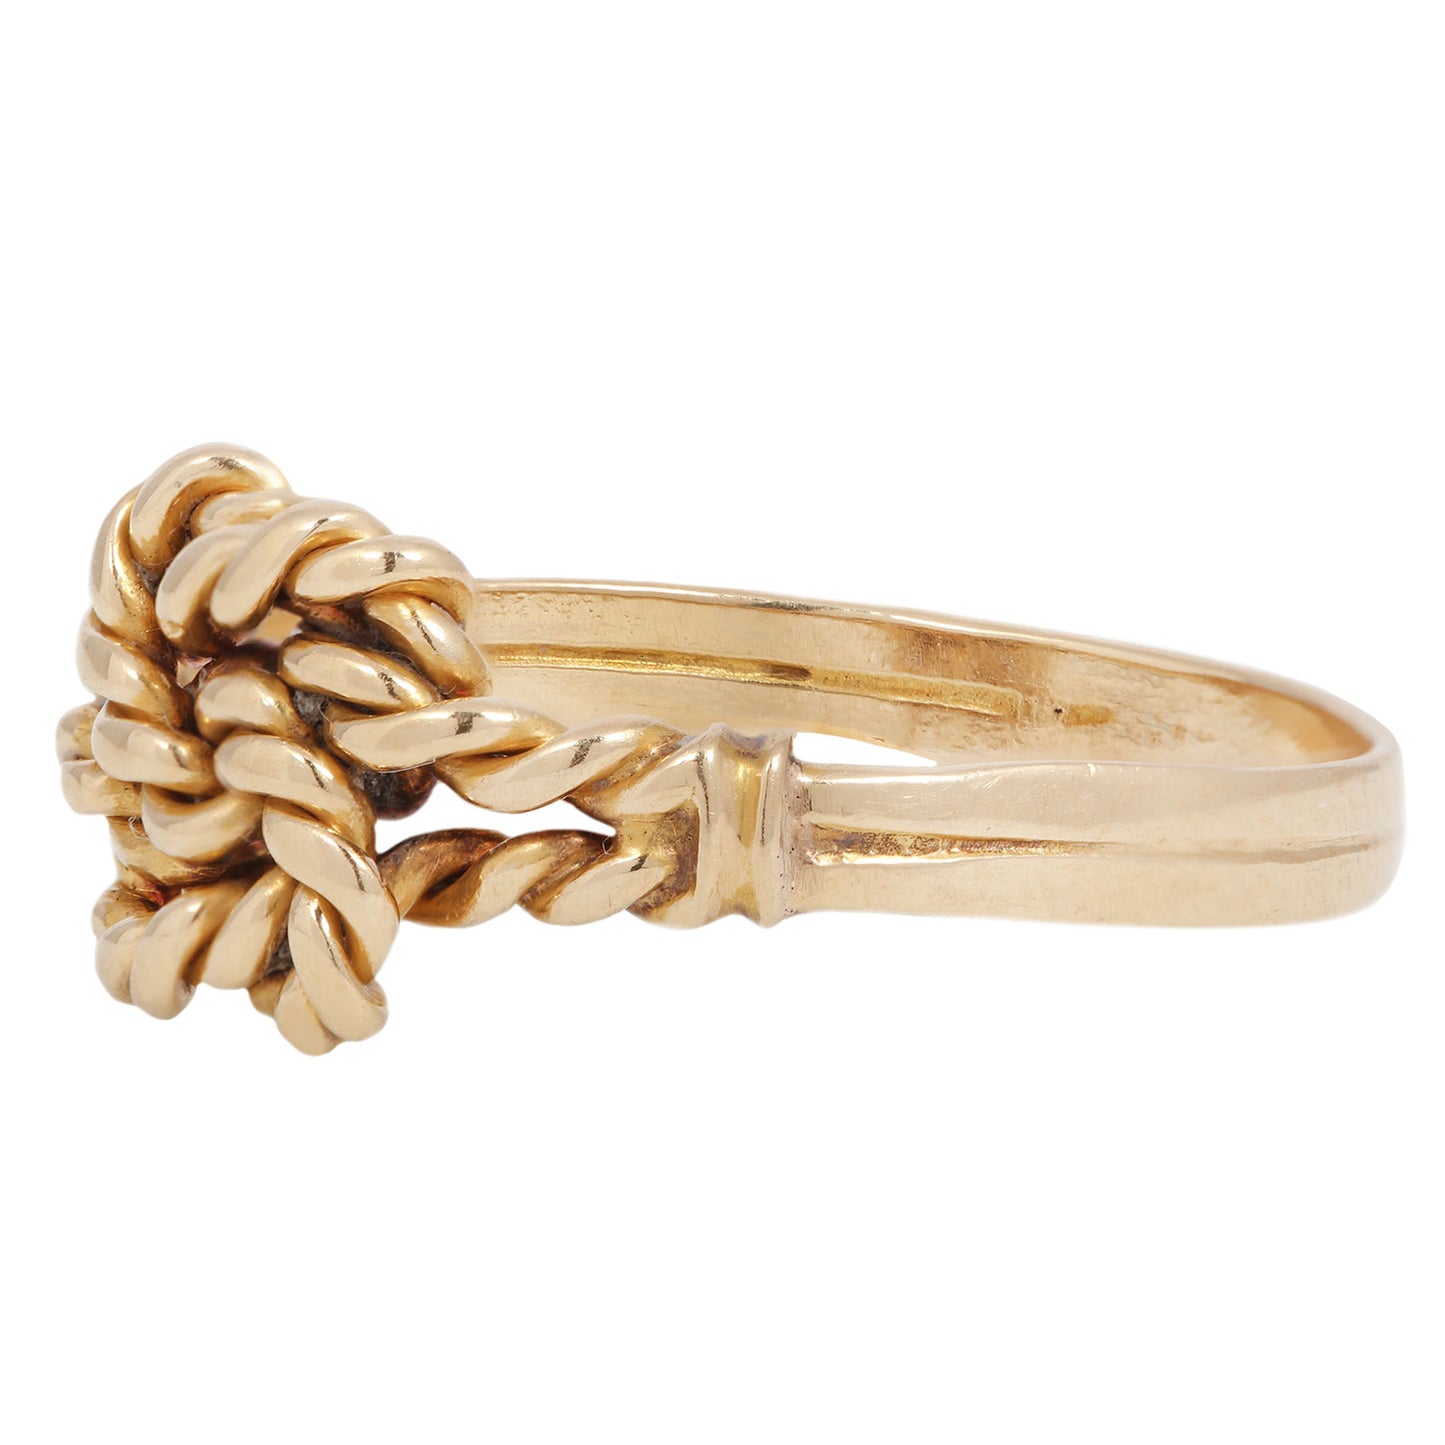 Entwined Knot Ring